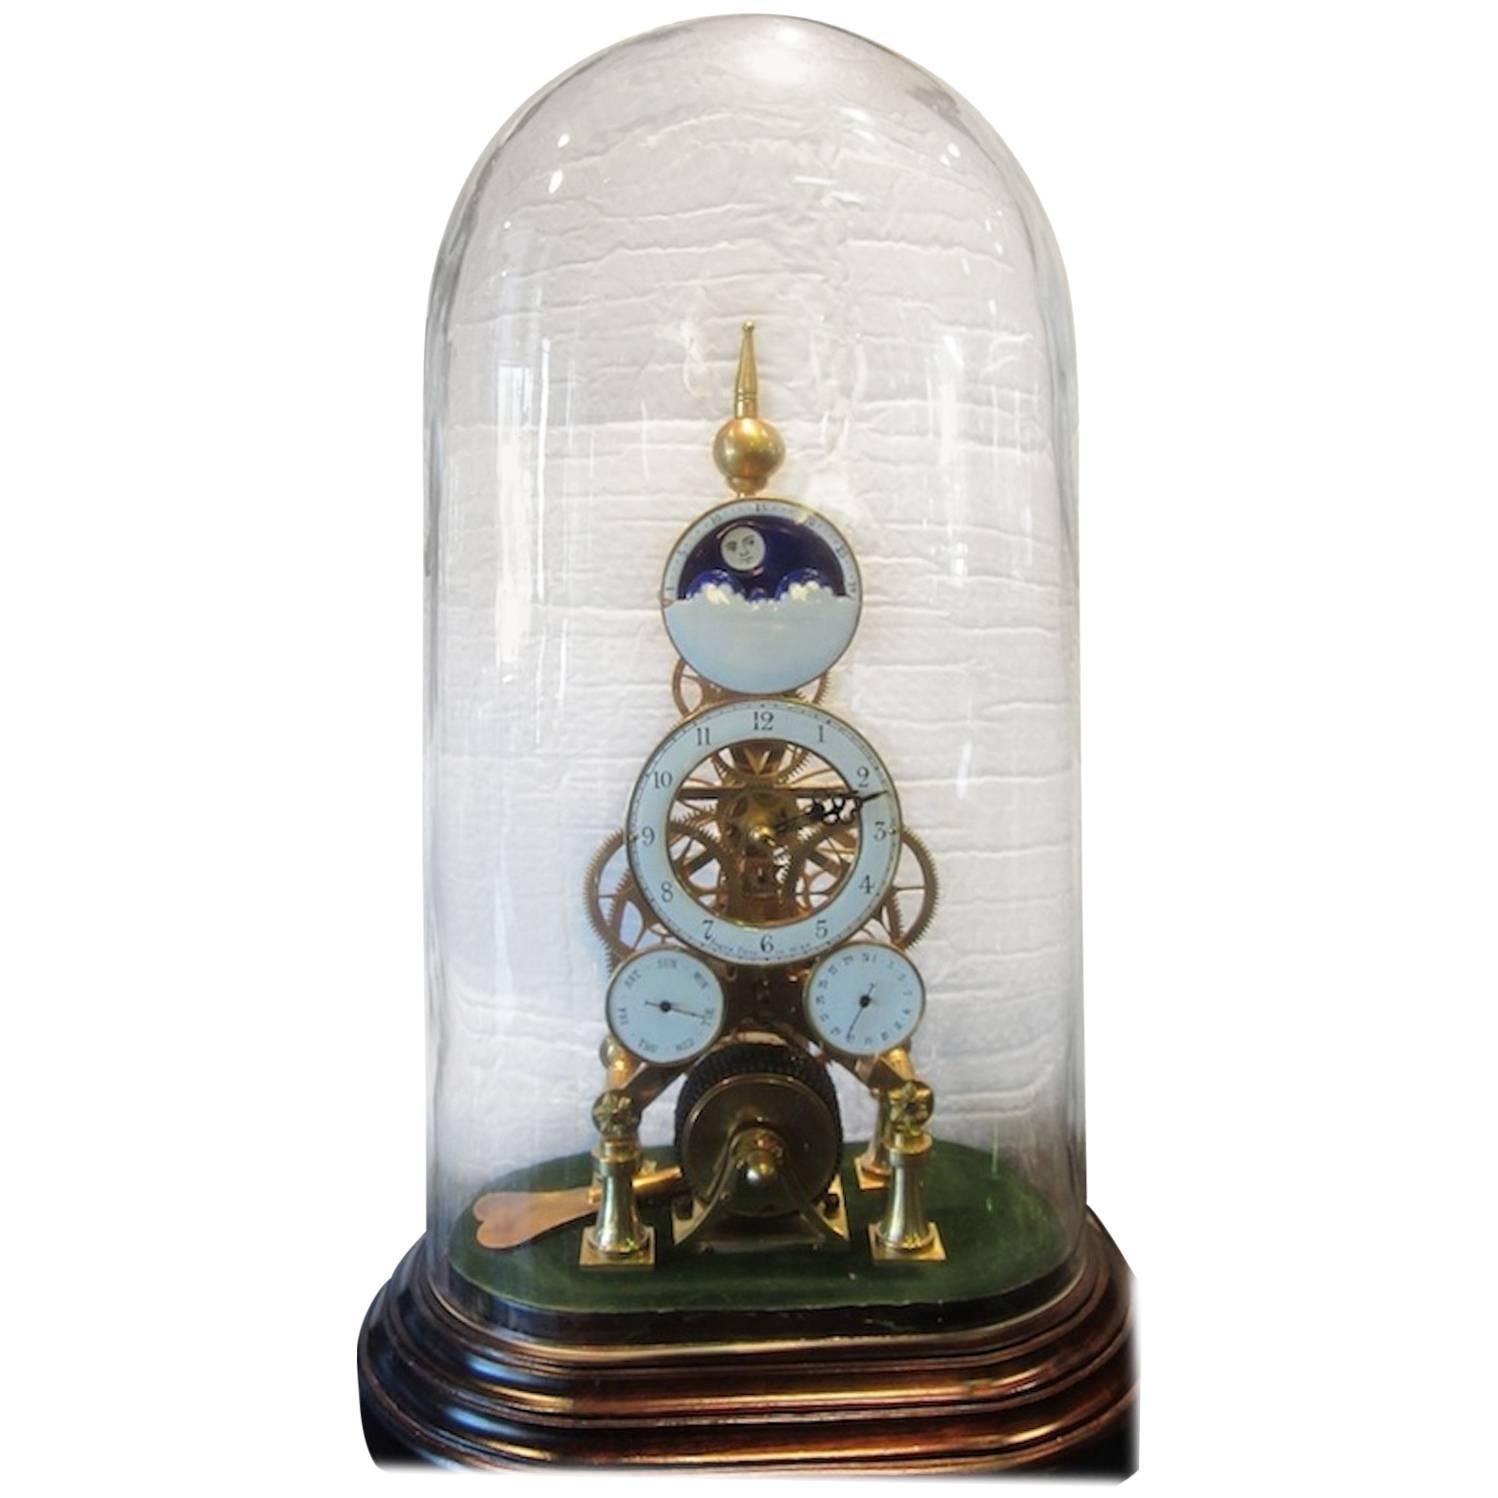 Skeleton Clock in a Glass Dome